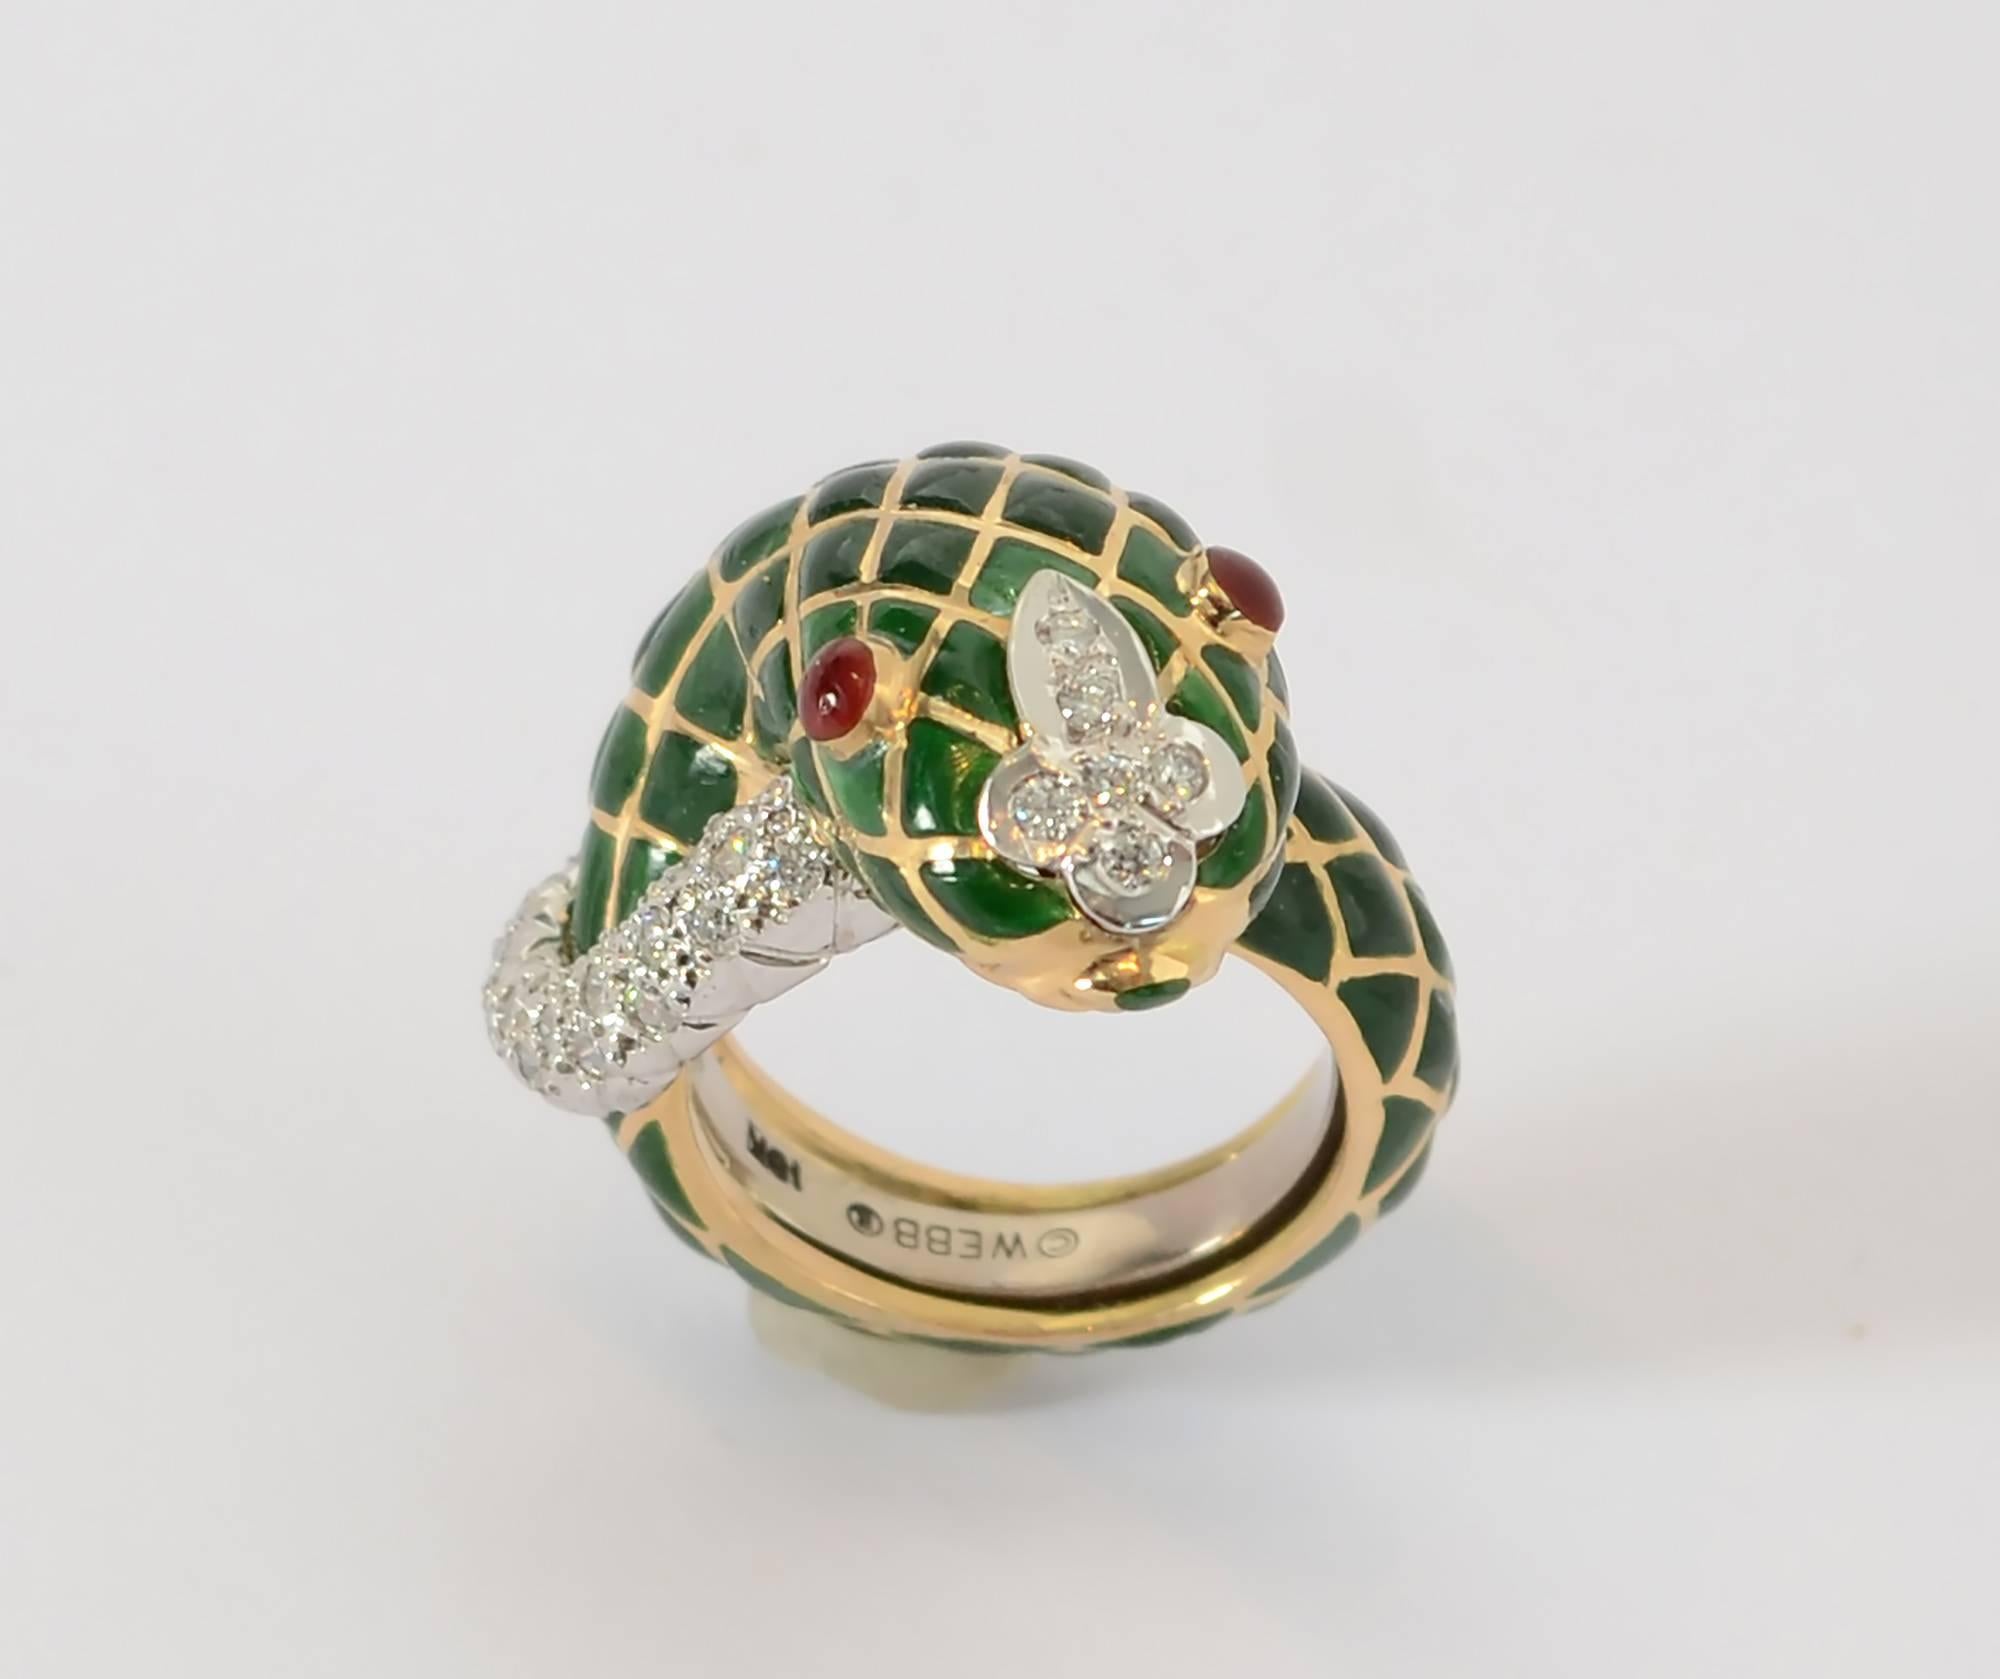 Coiled snake ring by David Webb. The body is green enamel with pave set diamond face and tail. Eyes are rubies. The ring is finger size 6 1/2; excellent condition.
The top of the ring measures 1